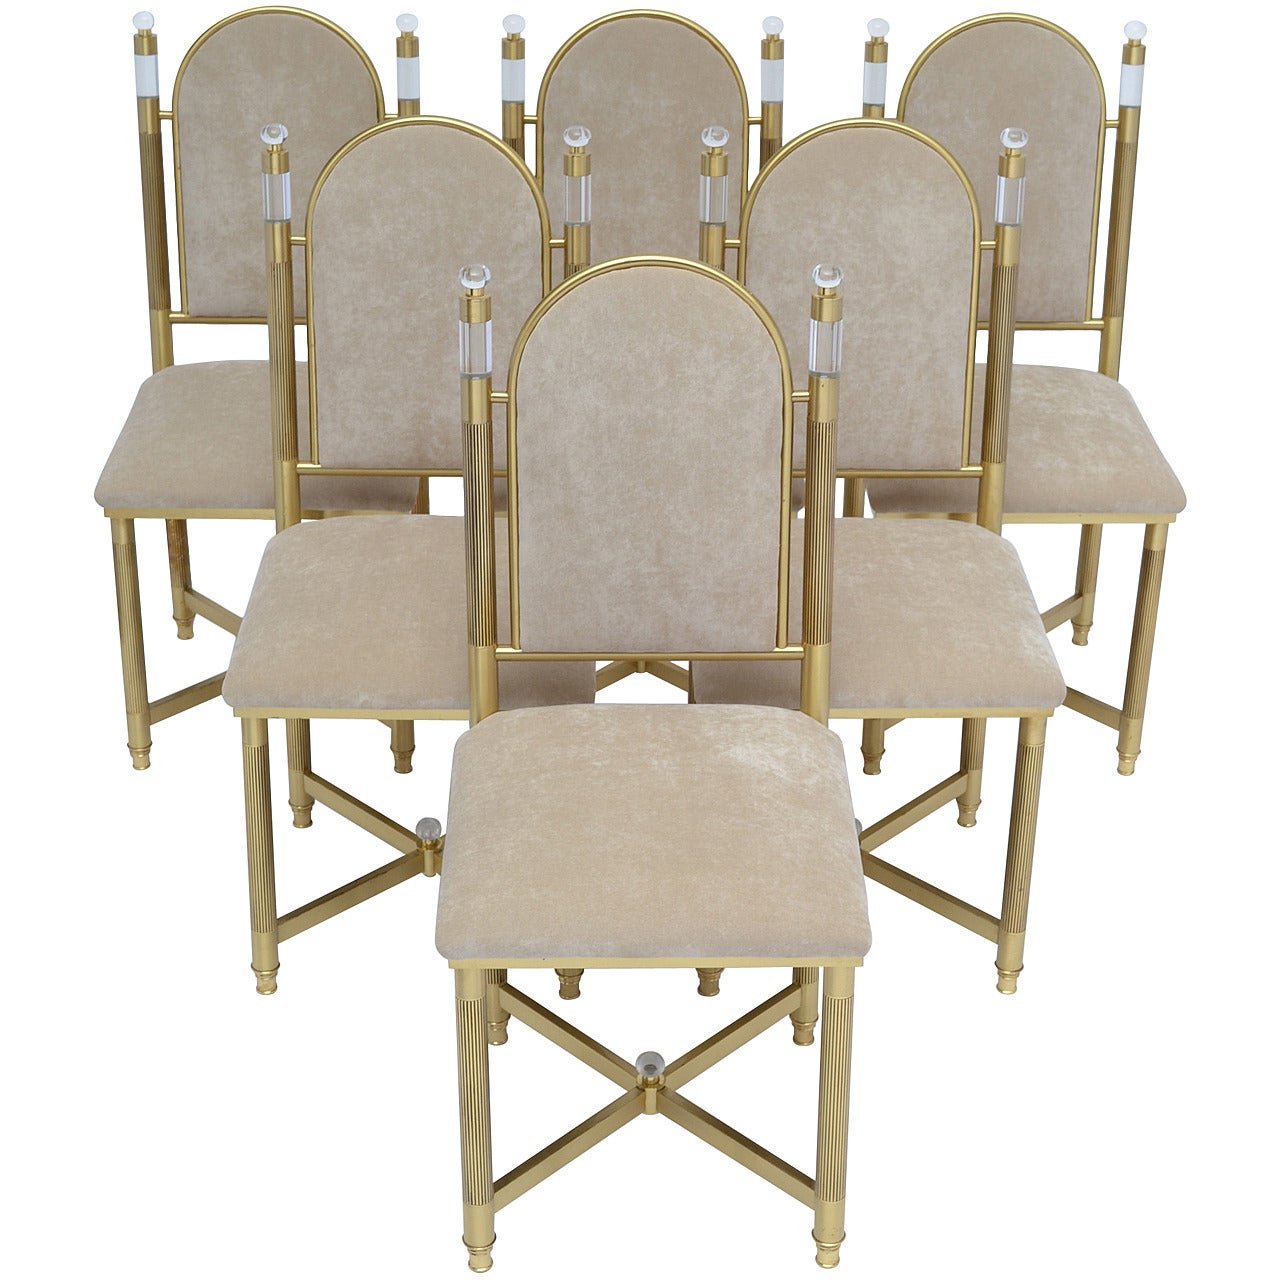 Maison Valenti Brass and Lucite Dining Chairs